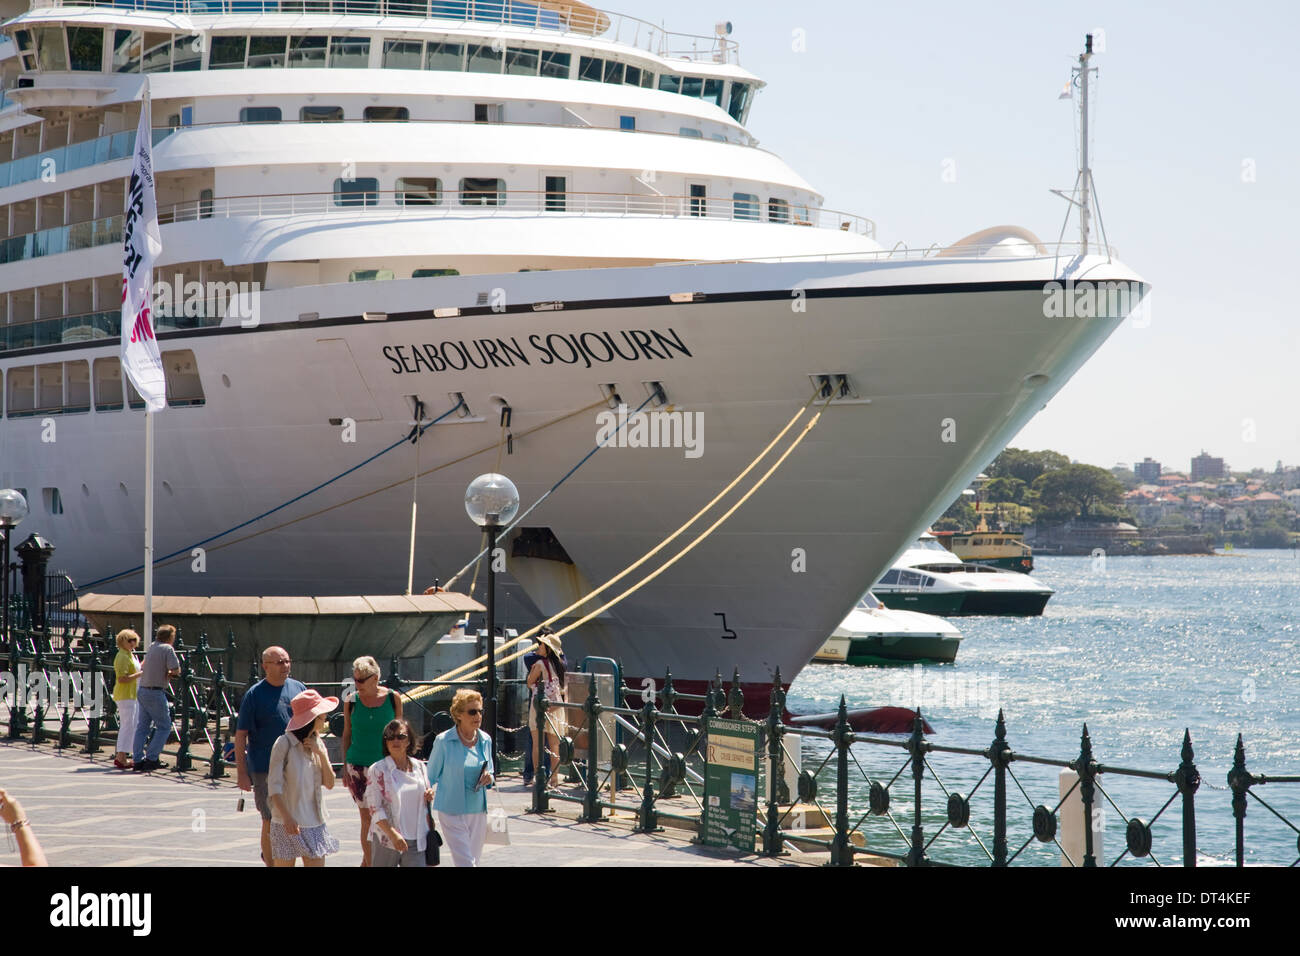 cruise ship seabourn sojourn moored in Circular Quay,Sydney Stock Photo